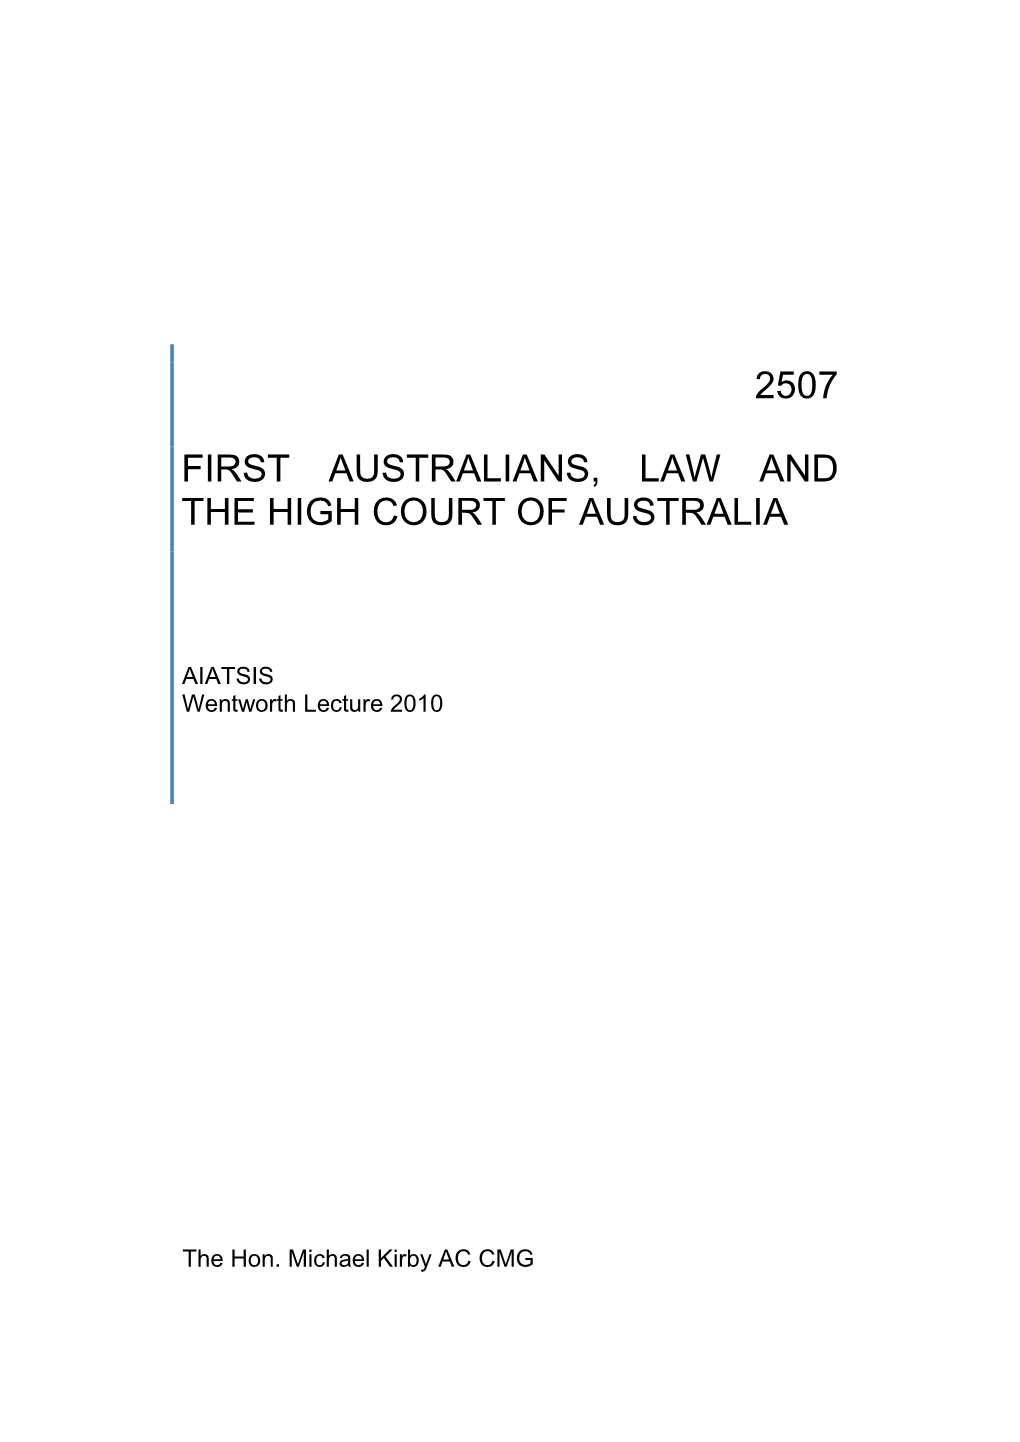 First Australians, Law and the High Court of Australia